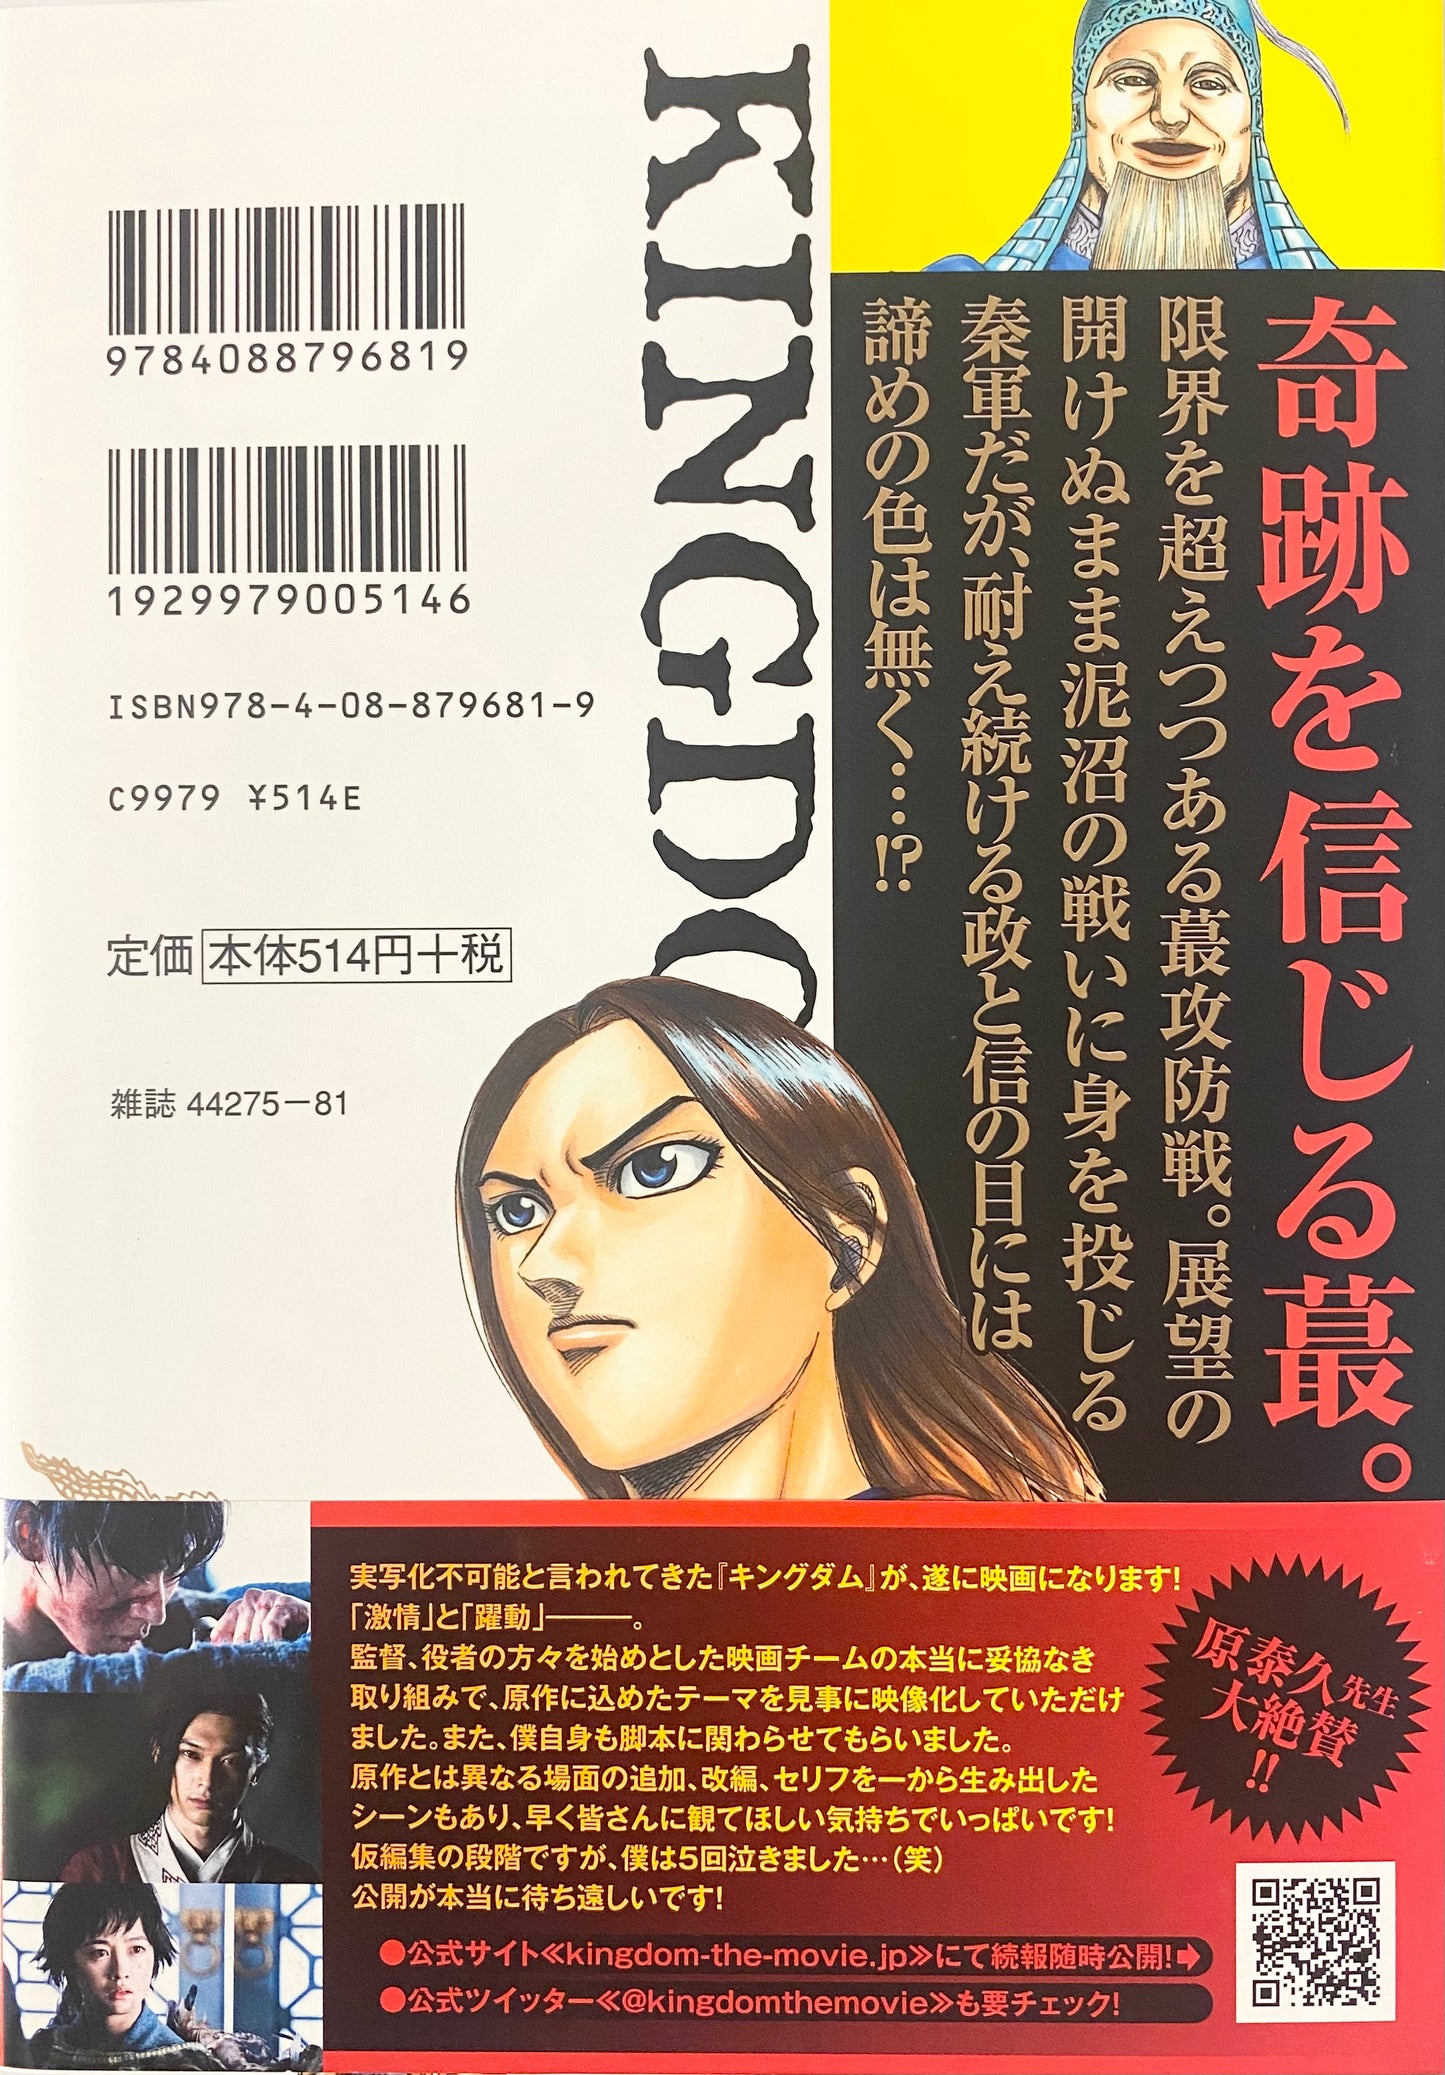 Kingdom Vol.32-Official Japanese Edition